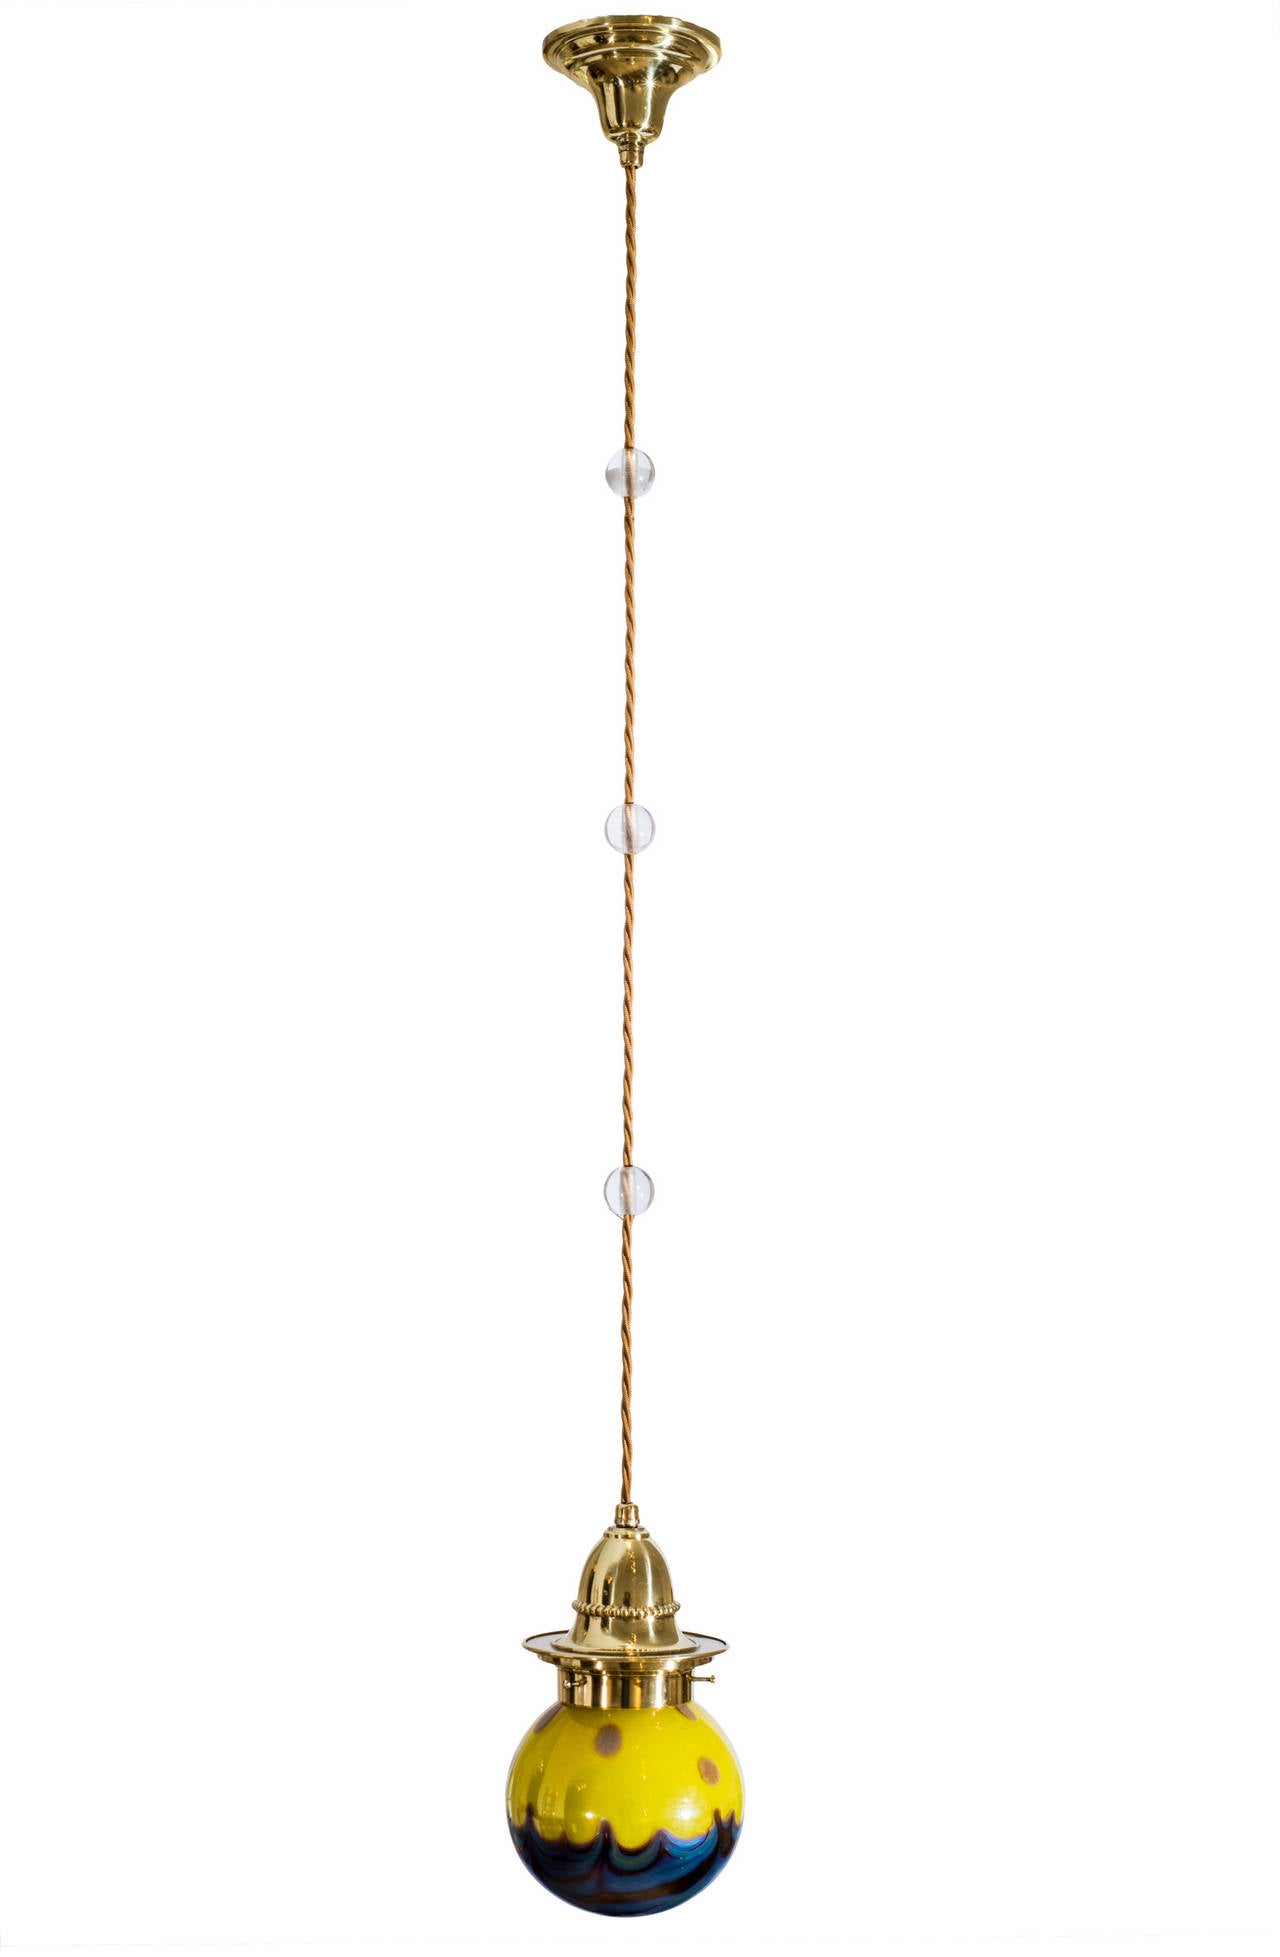 This hanging lamp was executed ca. 1902 in the typical „Wiener Jugendstil“ and is in a very god condition. The three glass orbs are a common style element of the Wiener Jugendstil and can be found on some contemporary photographs of hanging lamps.